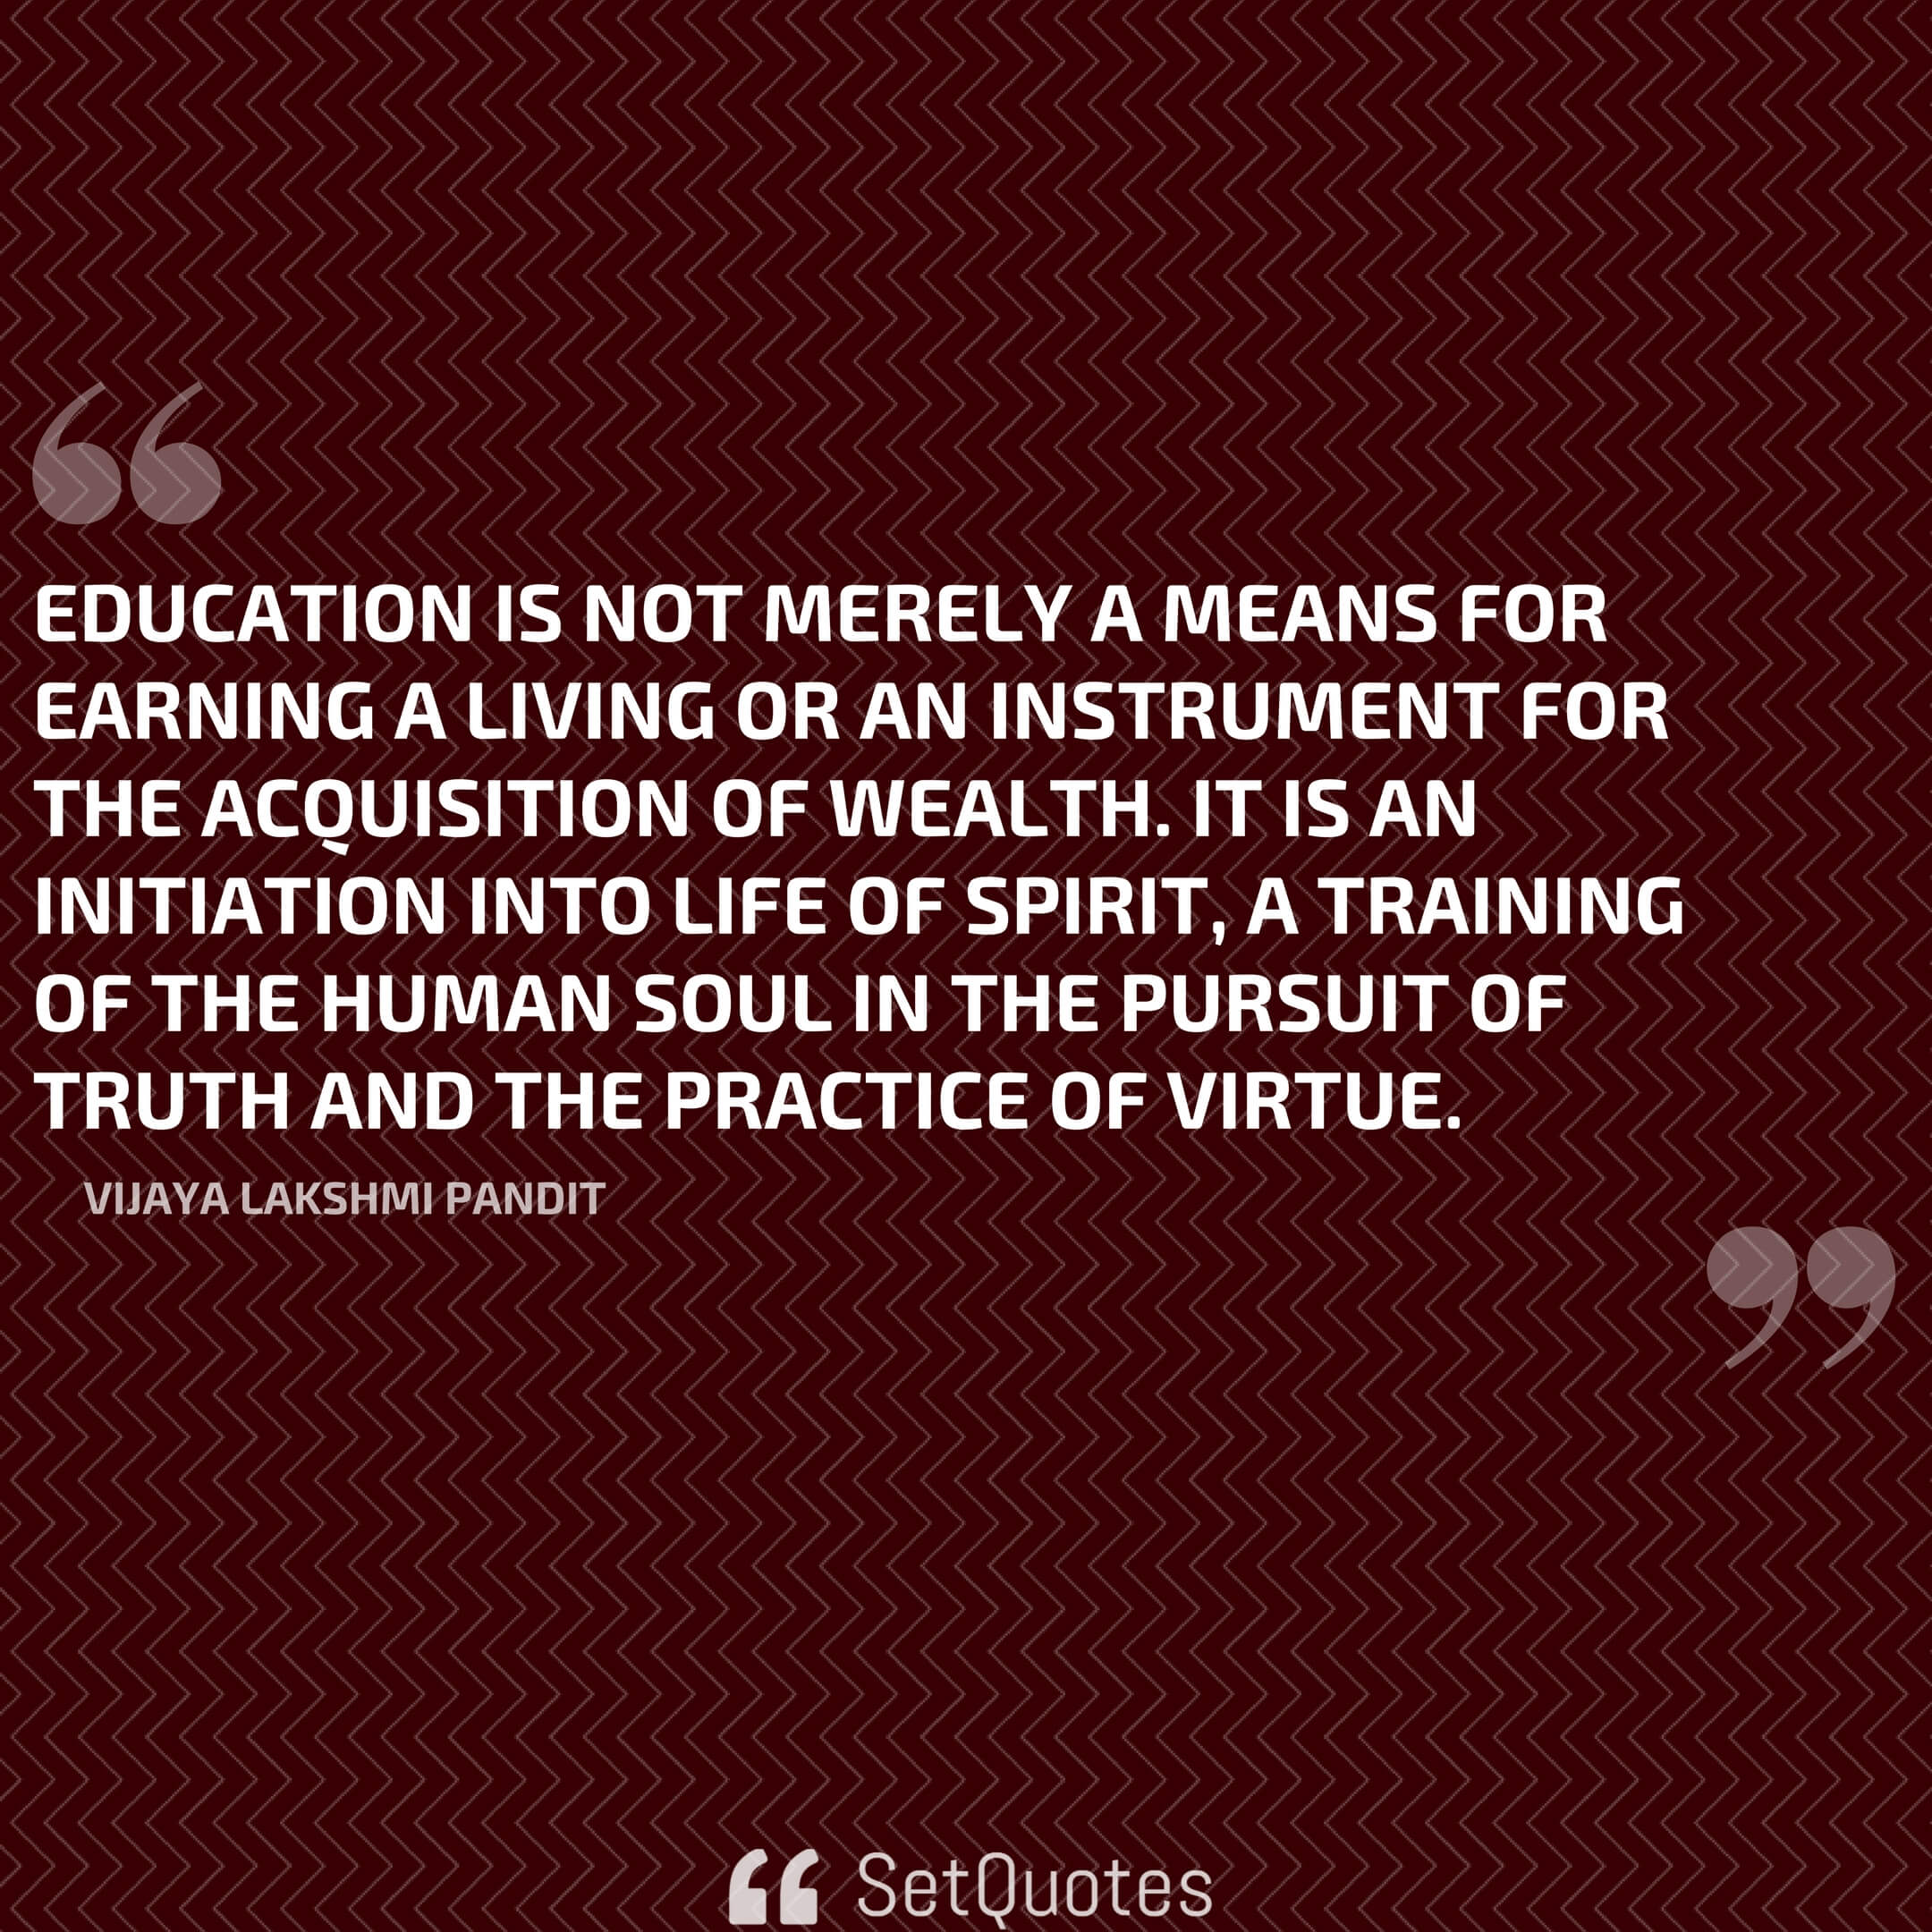 Education is not merely a means for earning a living or an instrument for the acquisition of wealth. It is an initiation into life of spirit, a training of the human soul in the pursuit of truth and the practice of virtue. - Vijaya Lakshmi Pandit